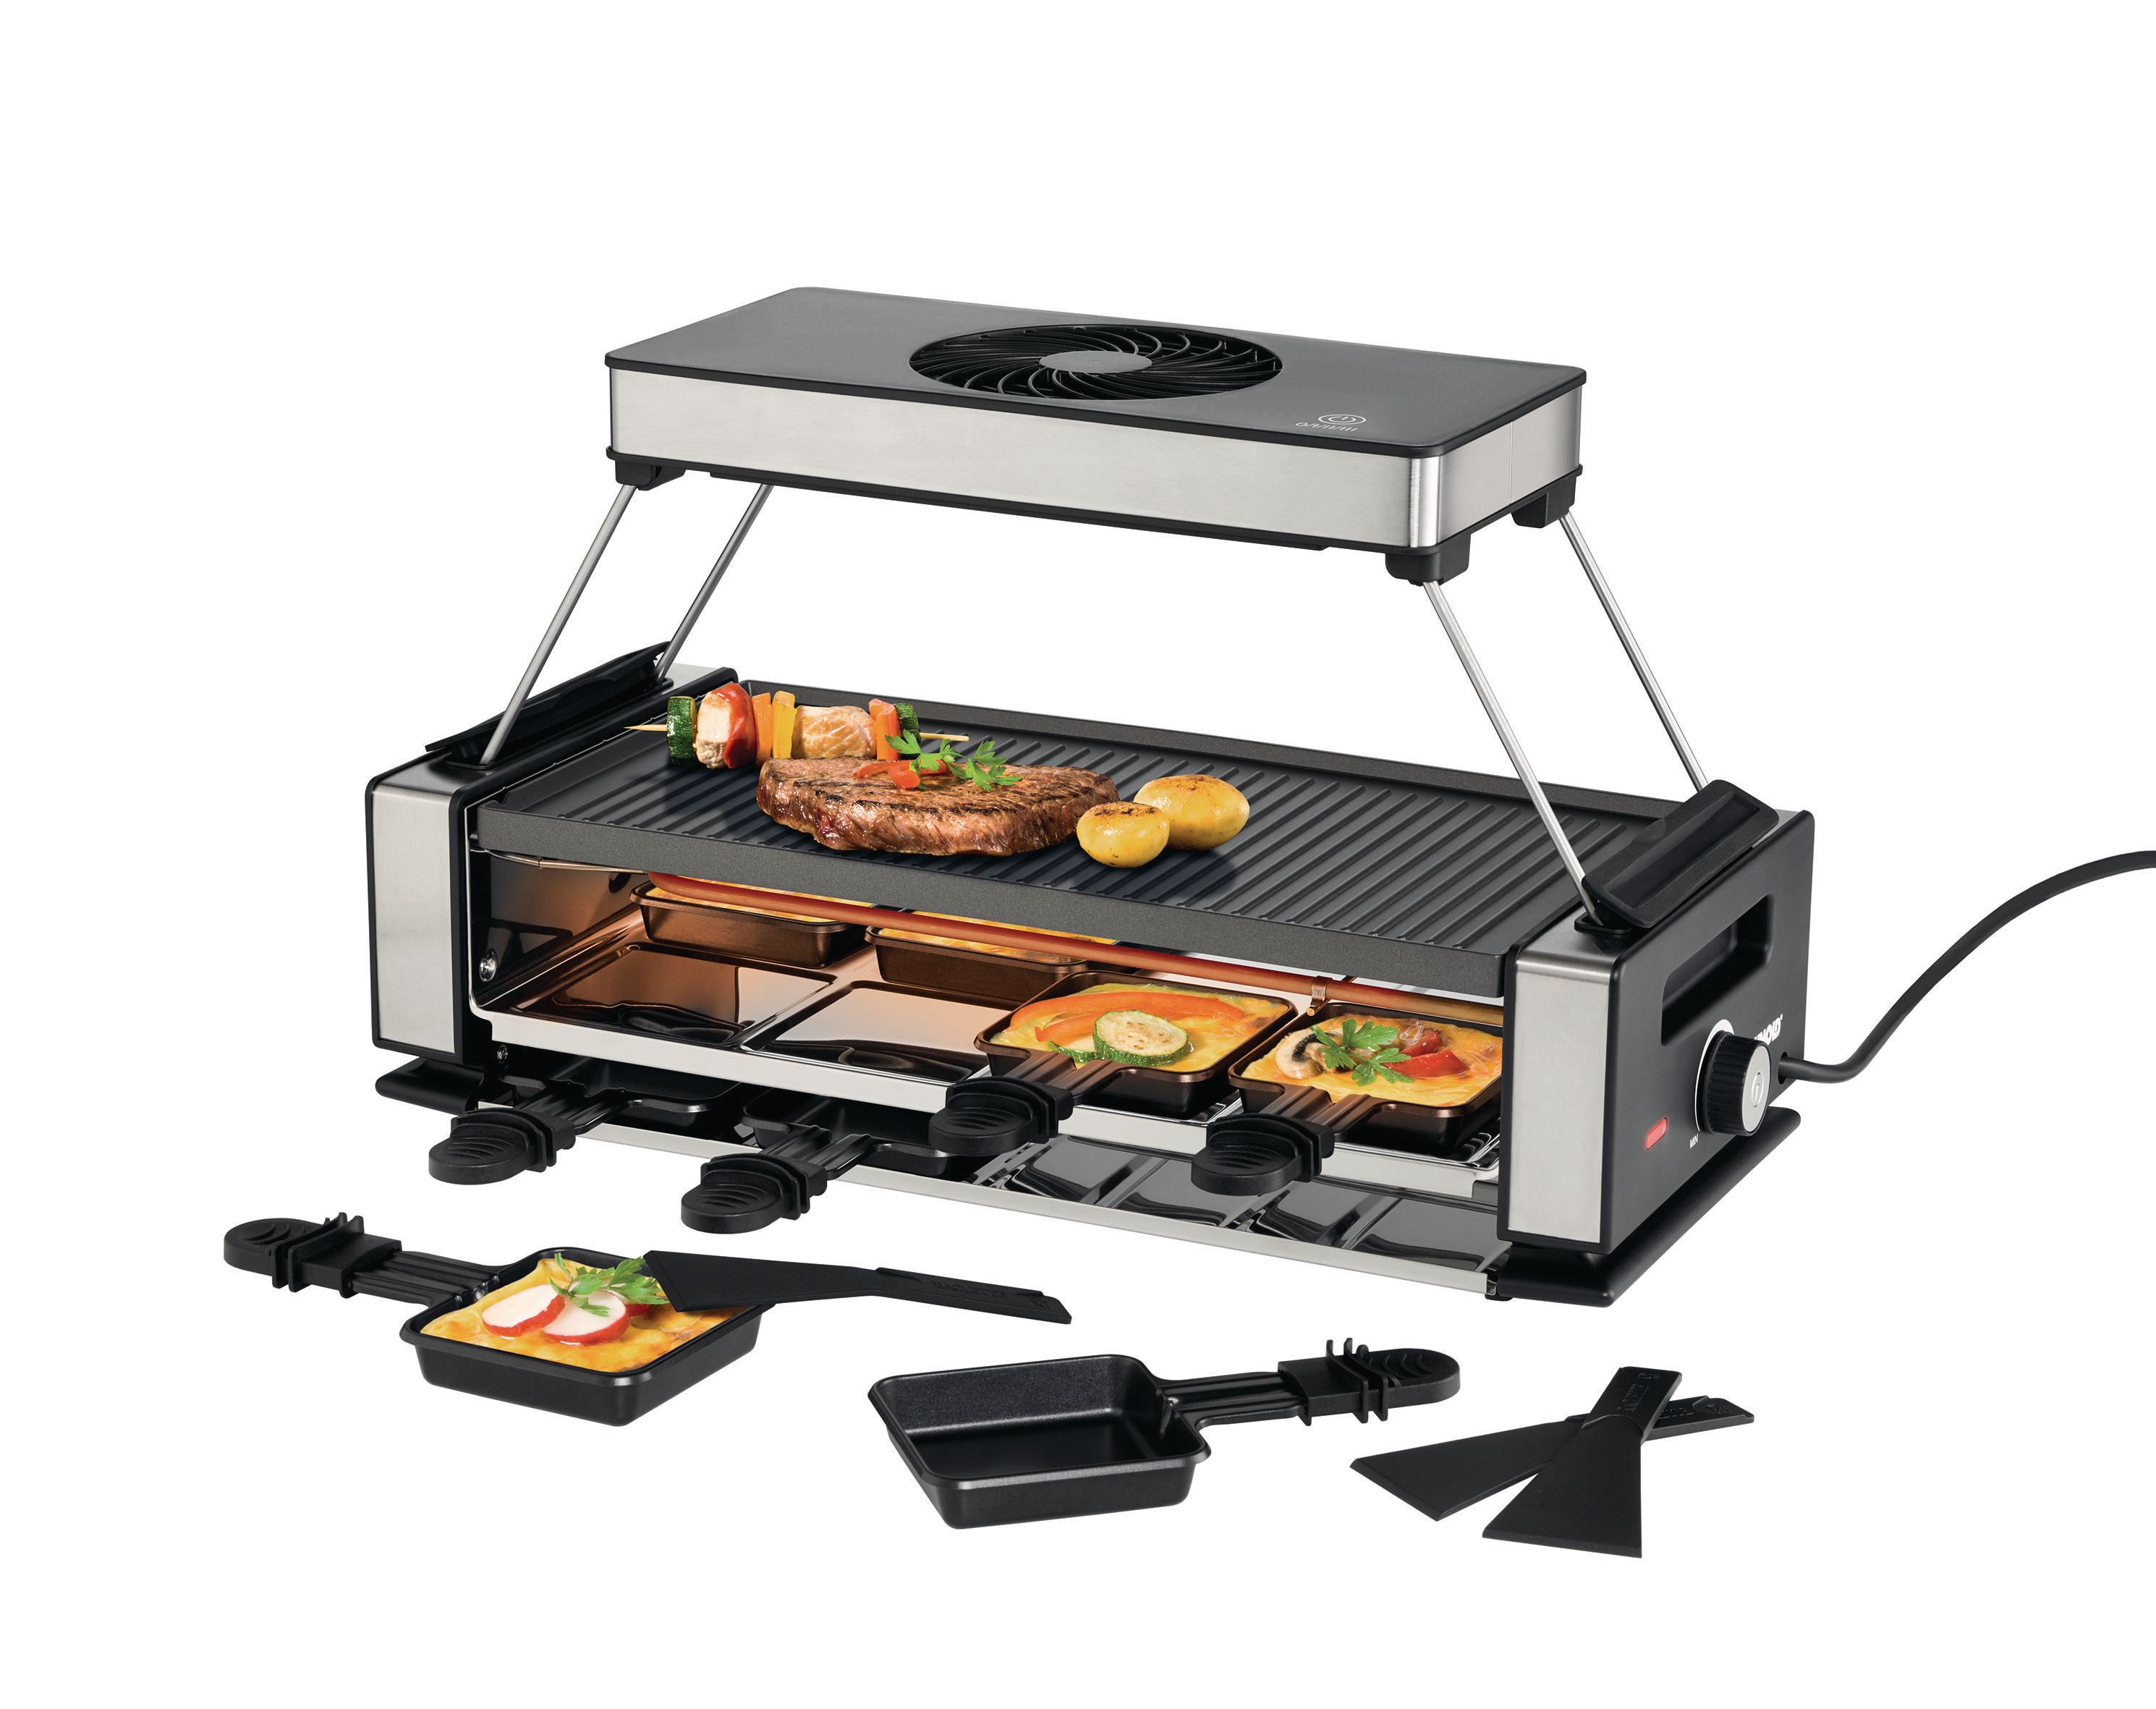 UNOLD 48785 Smokeless Raclette